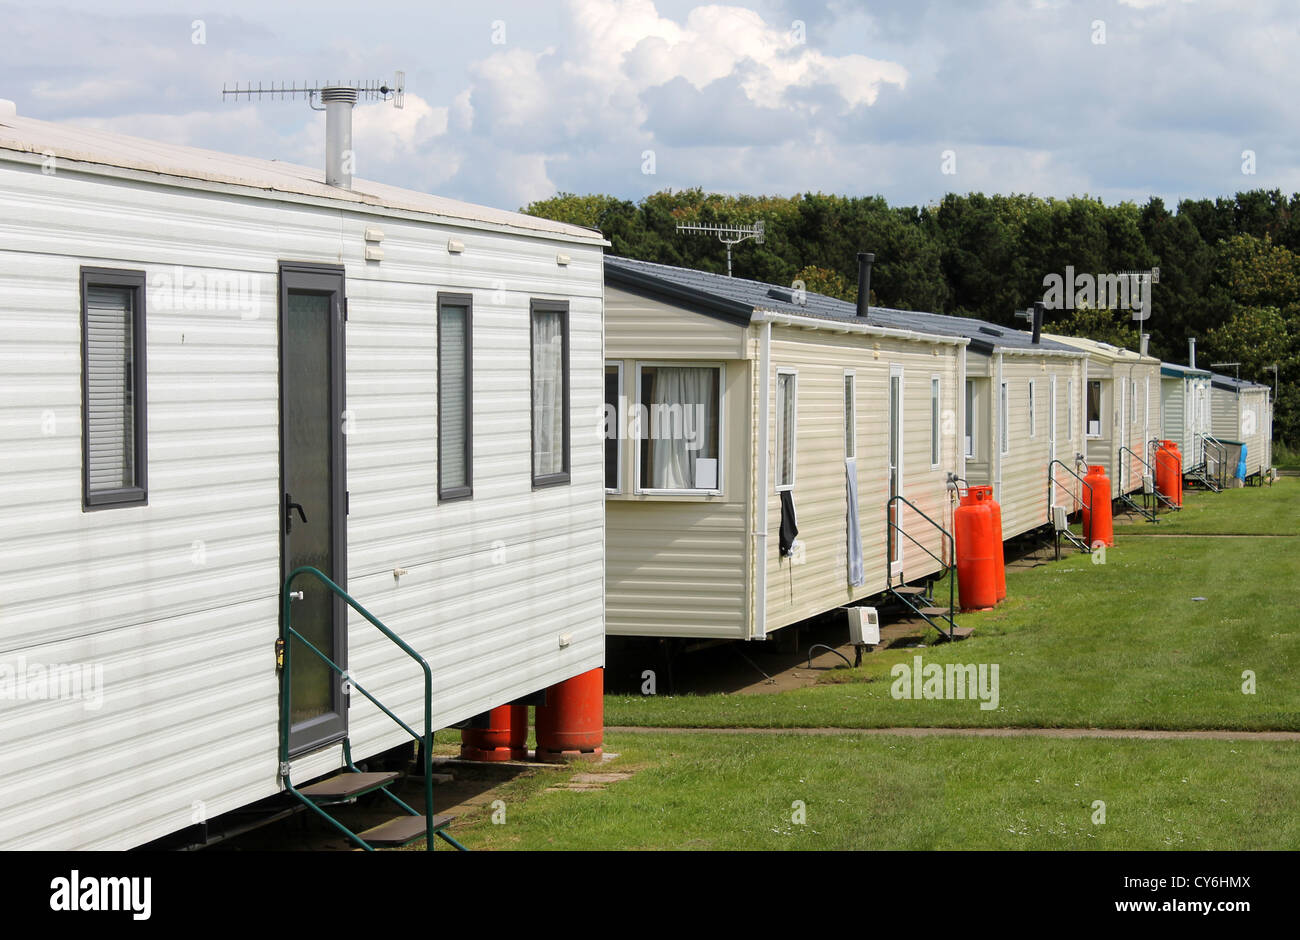 Row of caravan trailers in holiday park with cloudscape background. Stock Photo